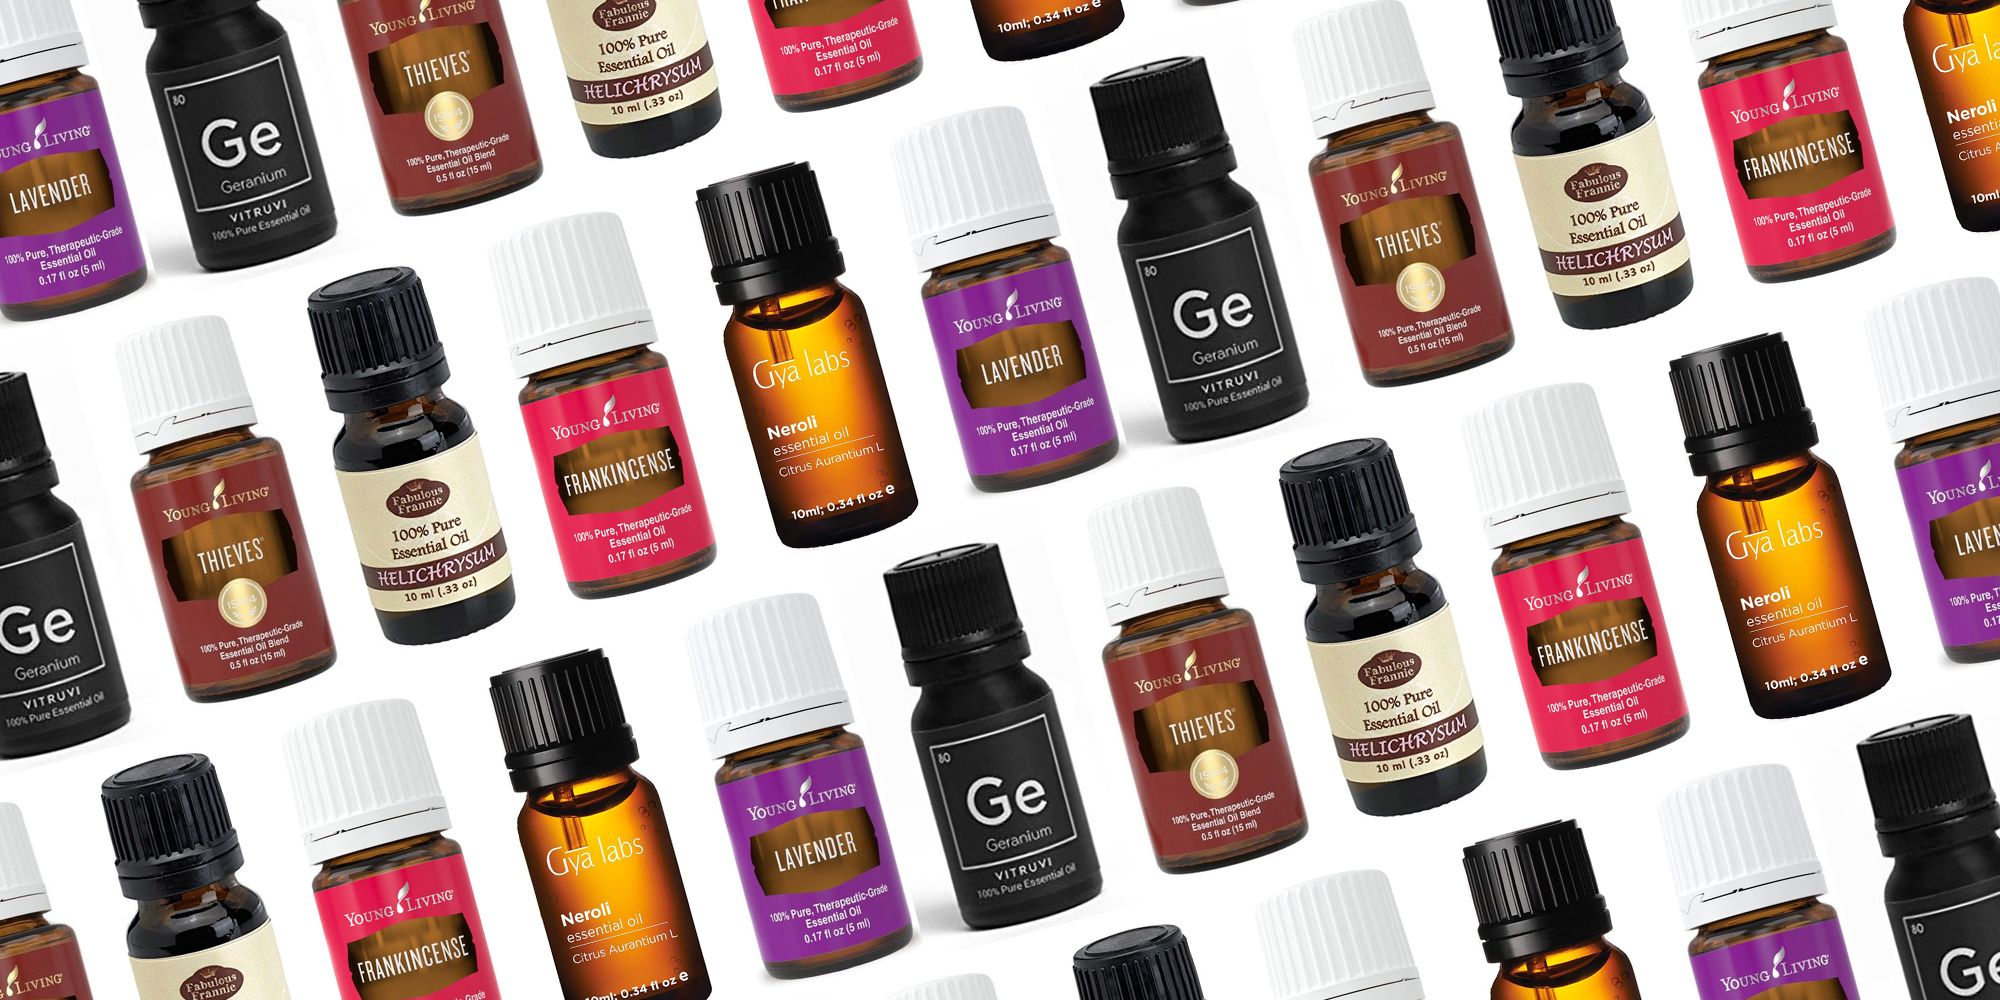 20+ Best Essential Oils For Glowing Skin - Thieves Oil Benefits, Lavender,  Grapefruit, and More